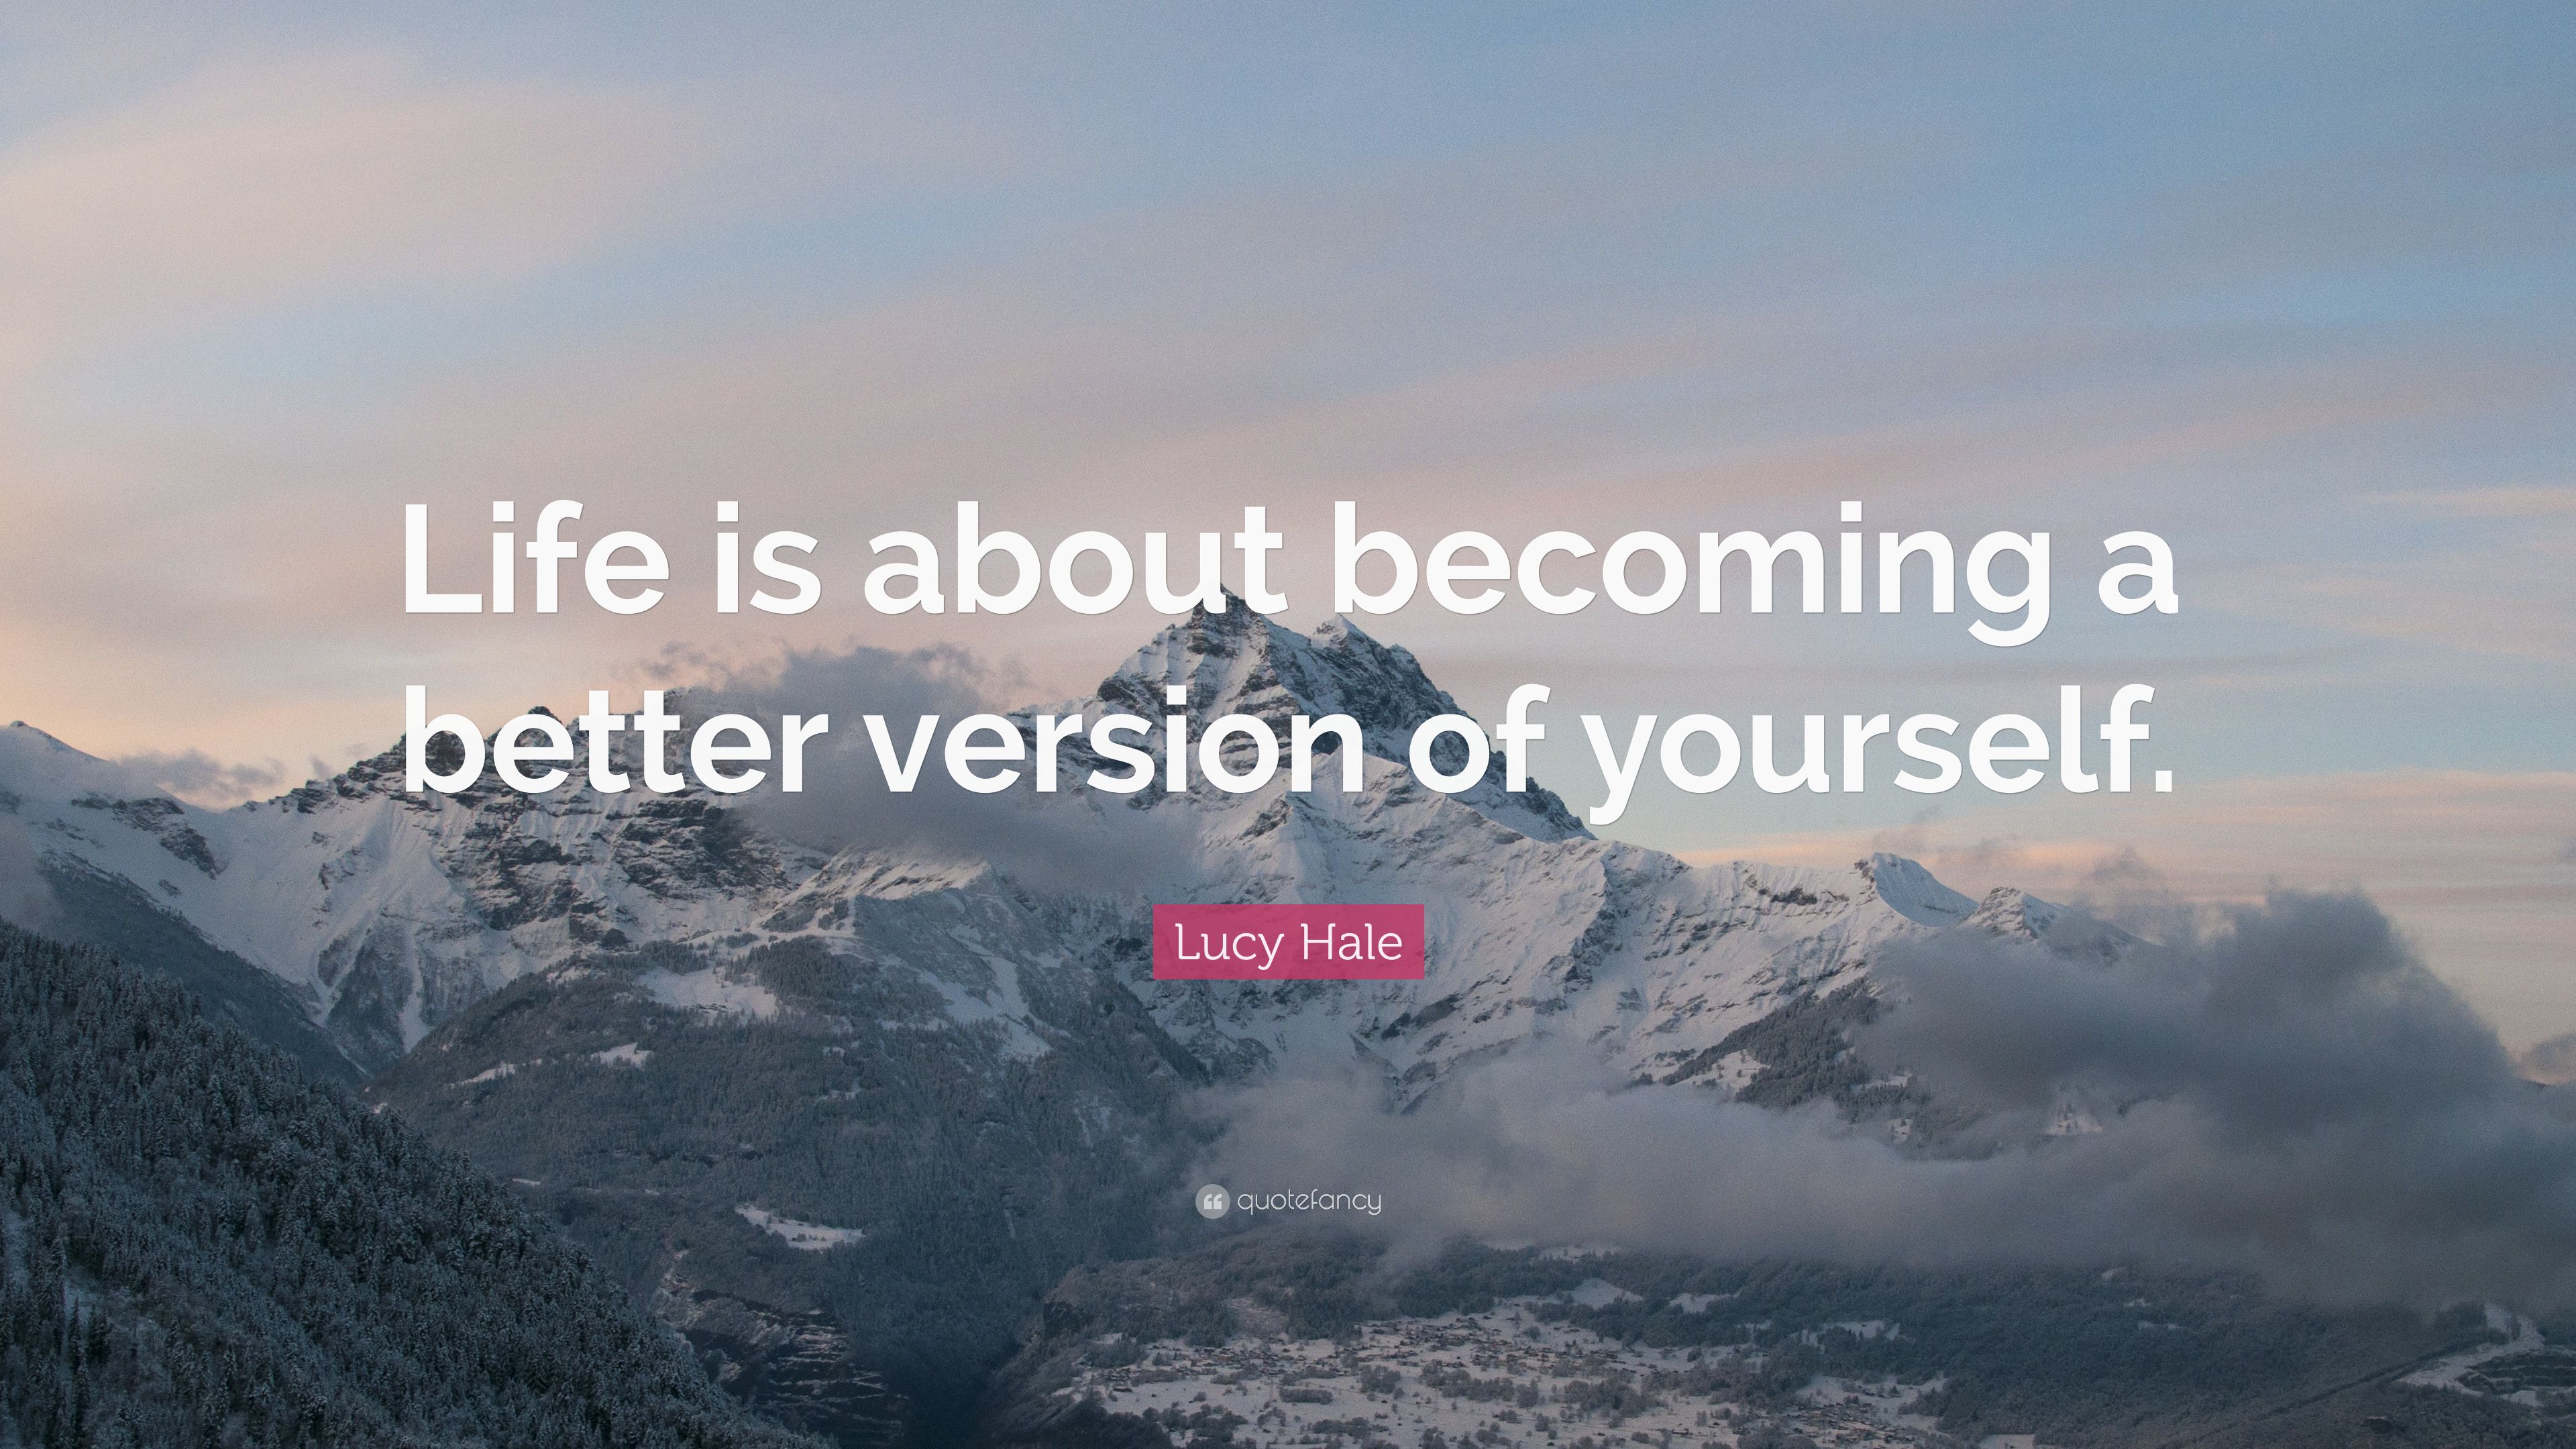 Lucy Hale Quote: “Life is about becoming a better version of yourself.” (7 wallpaper)